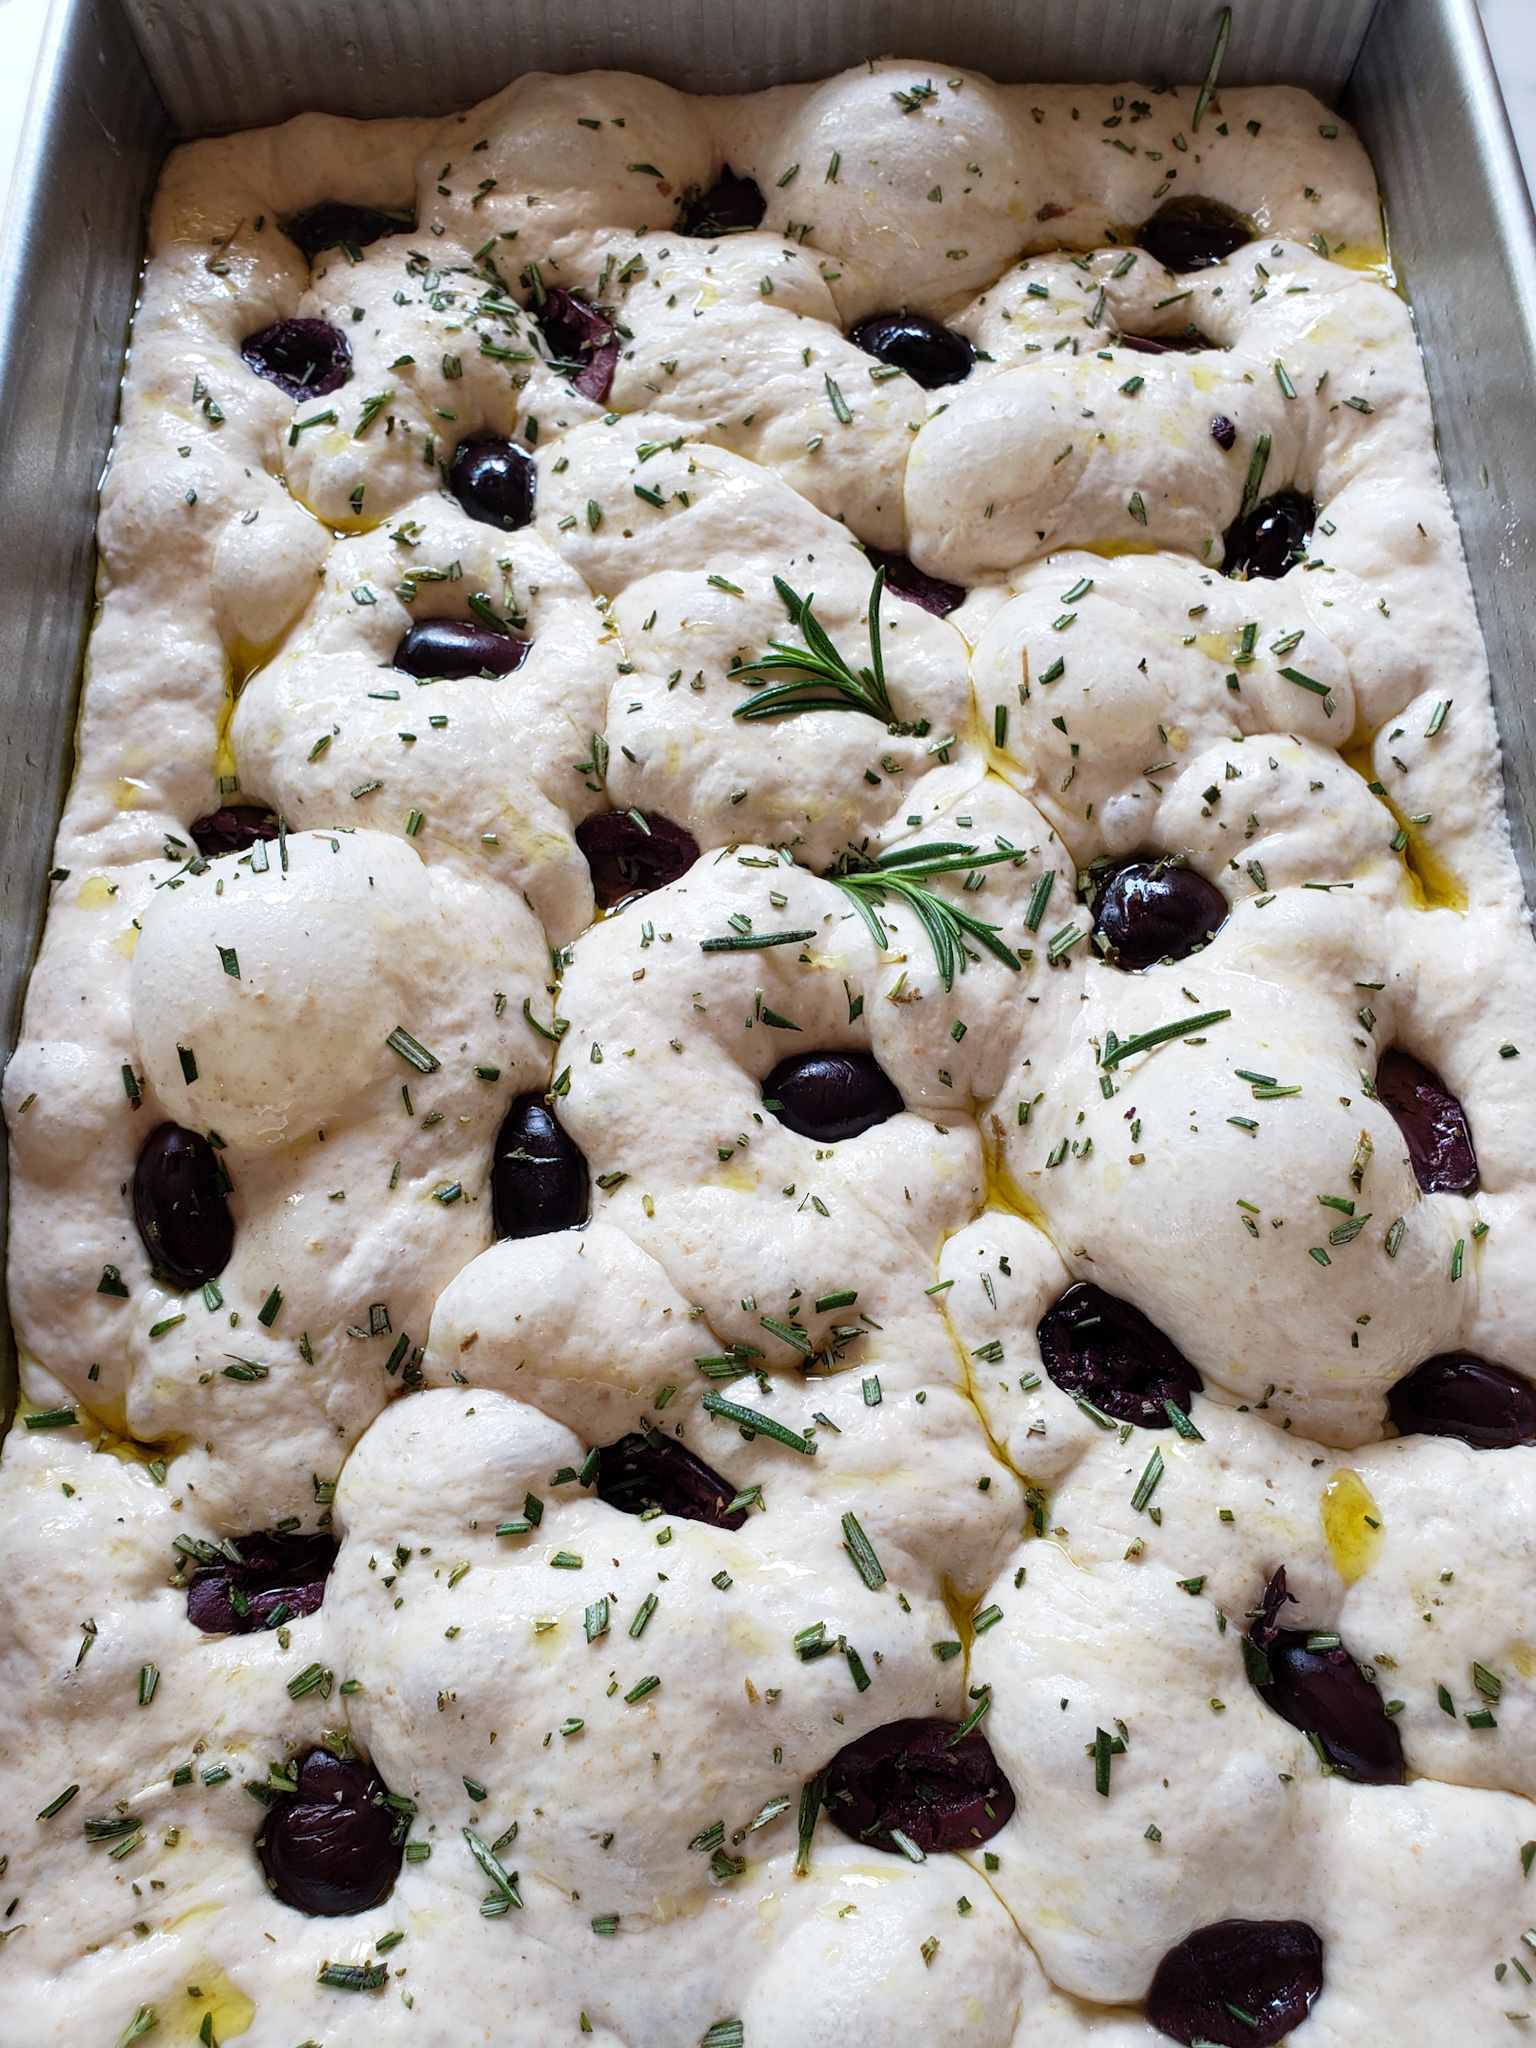 A close up image of the dough after it has been dressed with a drizzle of extra virgin olive oil, sprinkled with course sea salt, and topped with fresh chopped rosemary and kalamata olives. The olives have been lightly pushed into the dough.